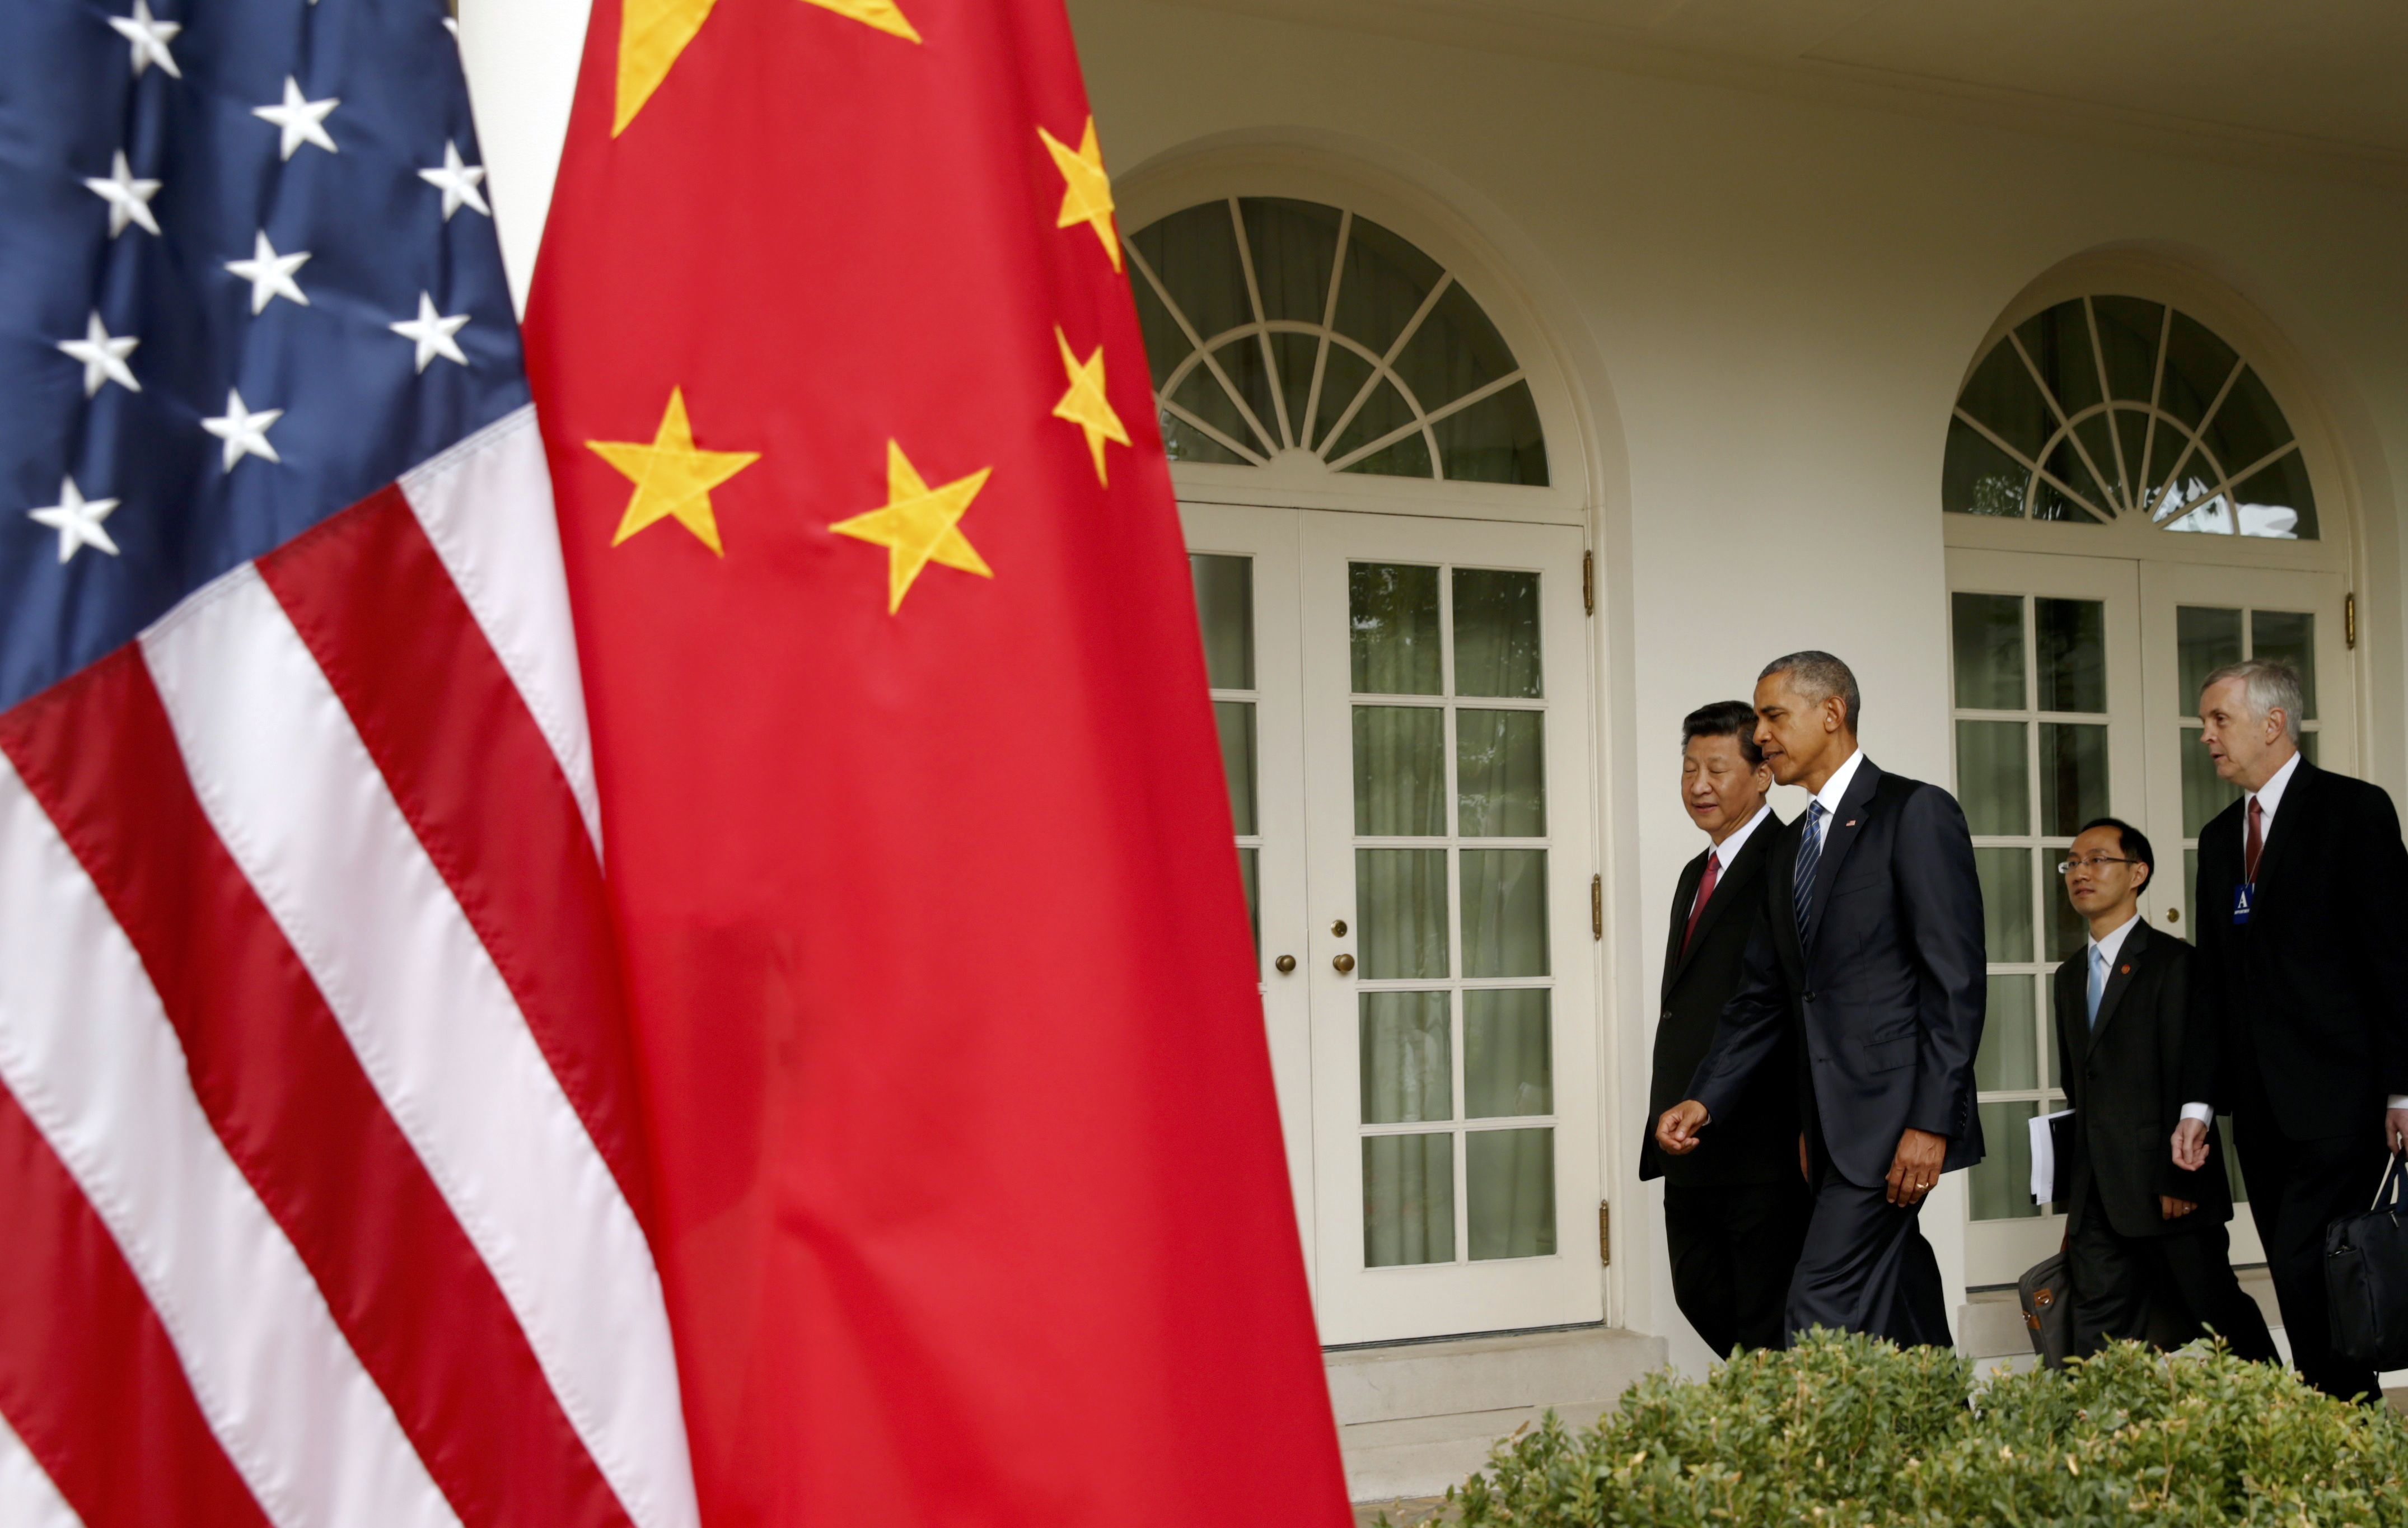 The announcement comes amid President Xi Jinping's visit to Washington. Above, Xi and US President Barack Obama at the White House. Photo: Reuters